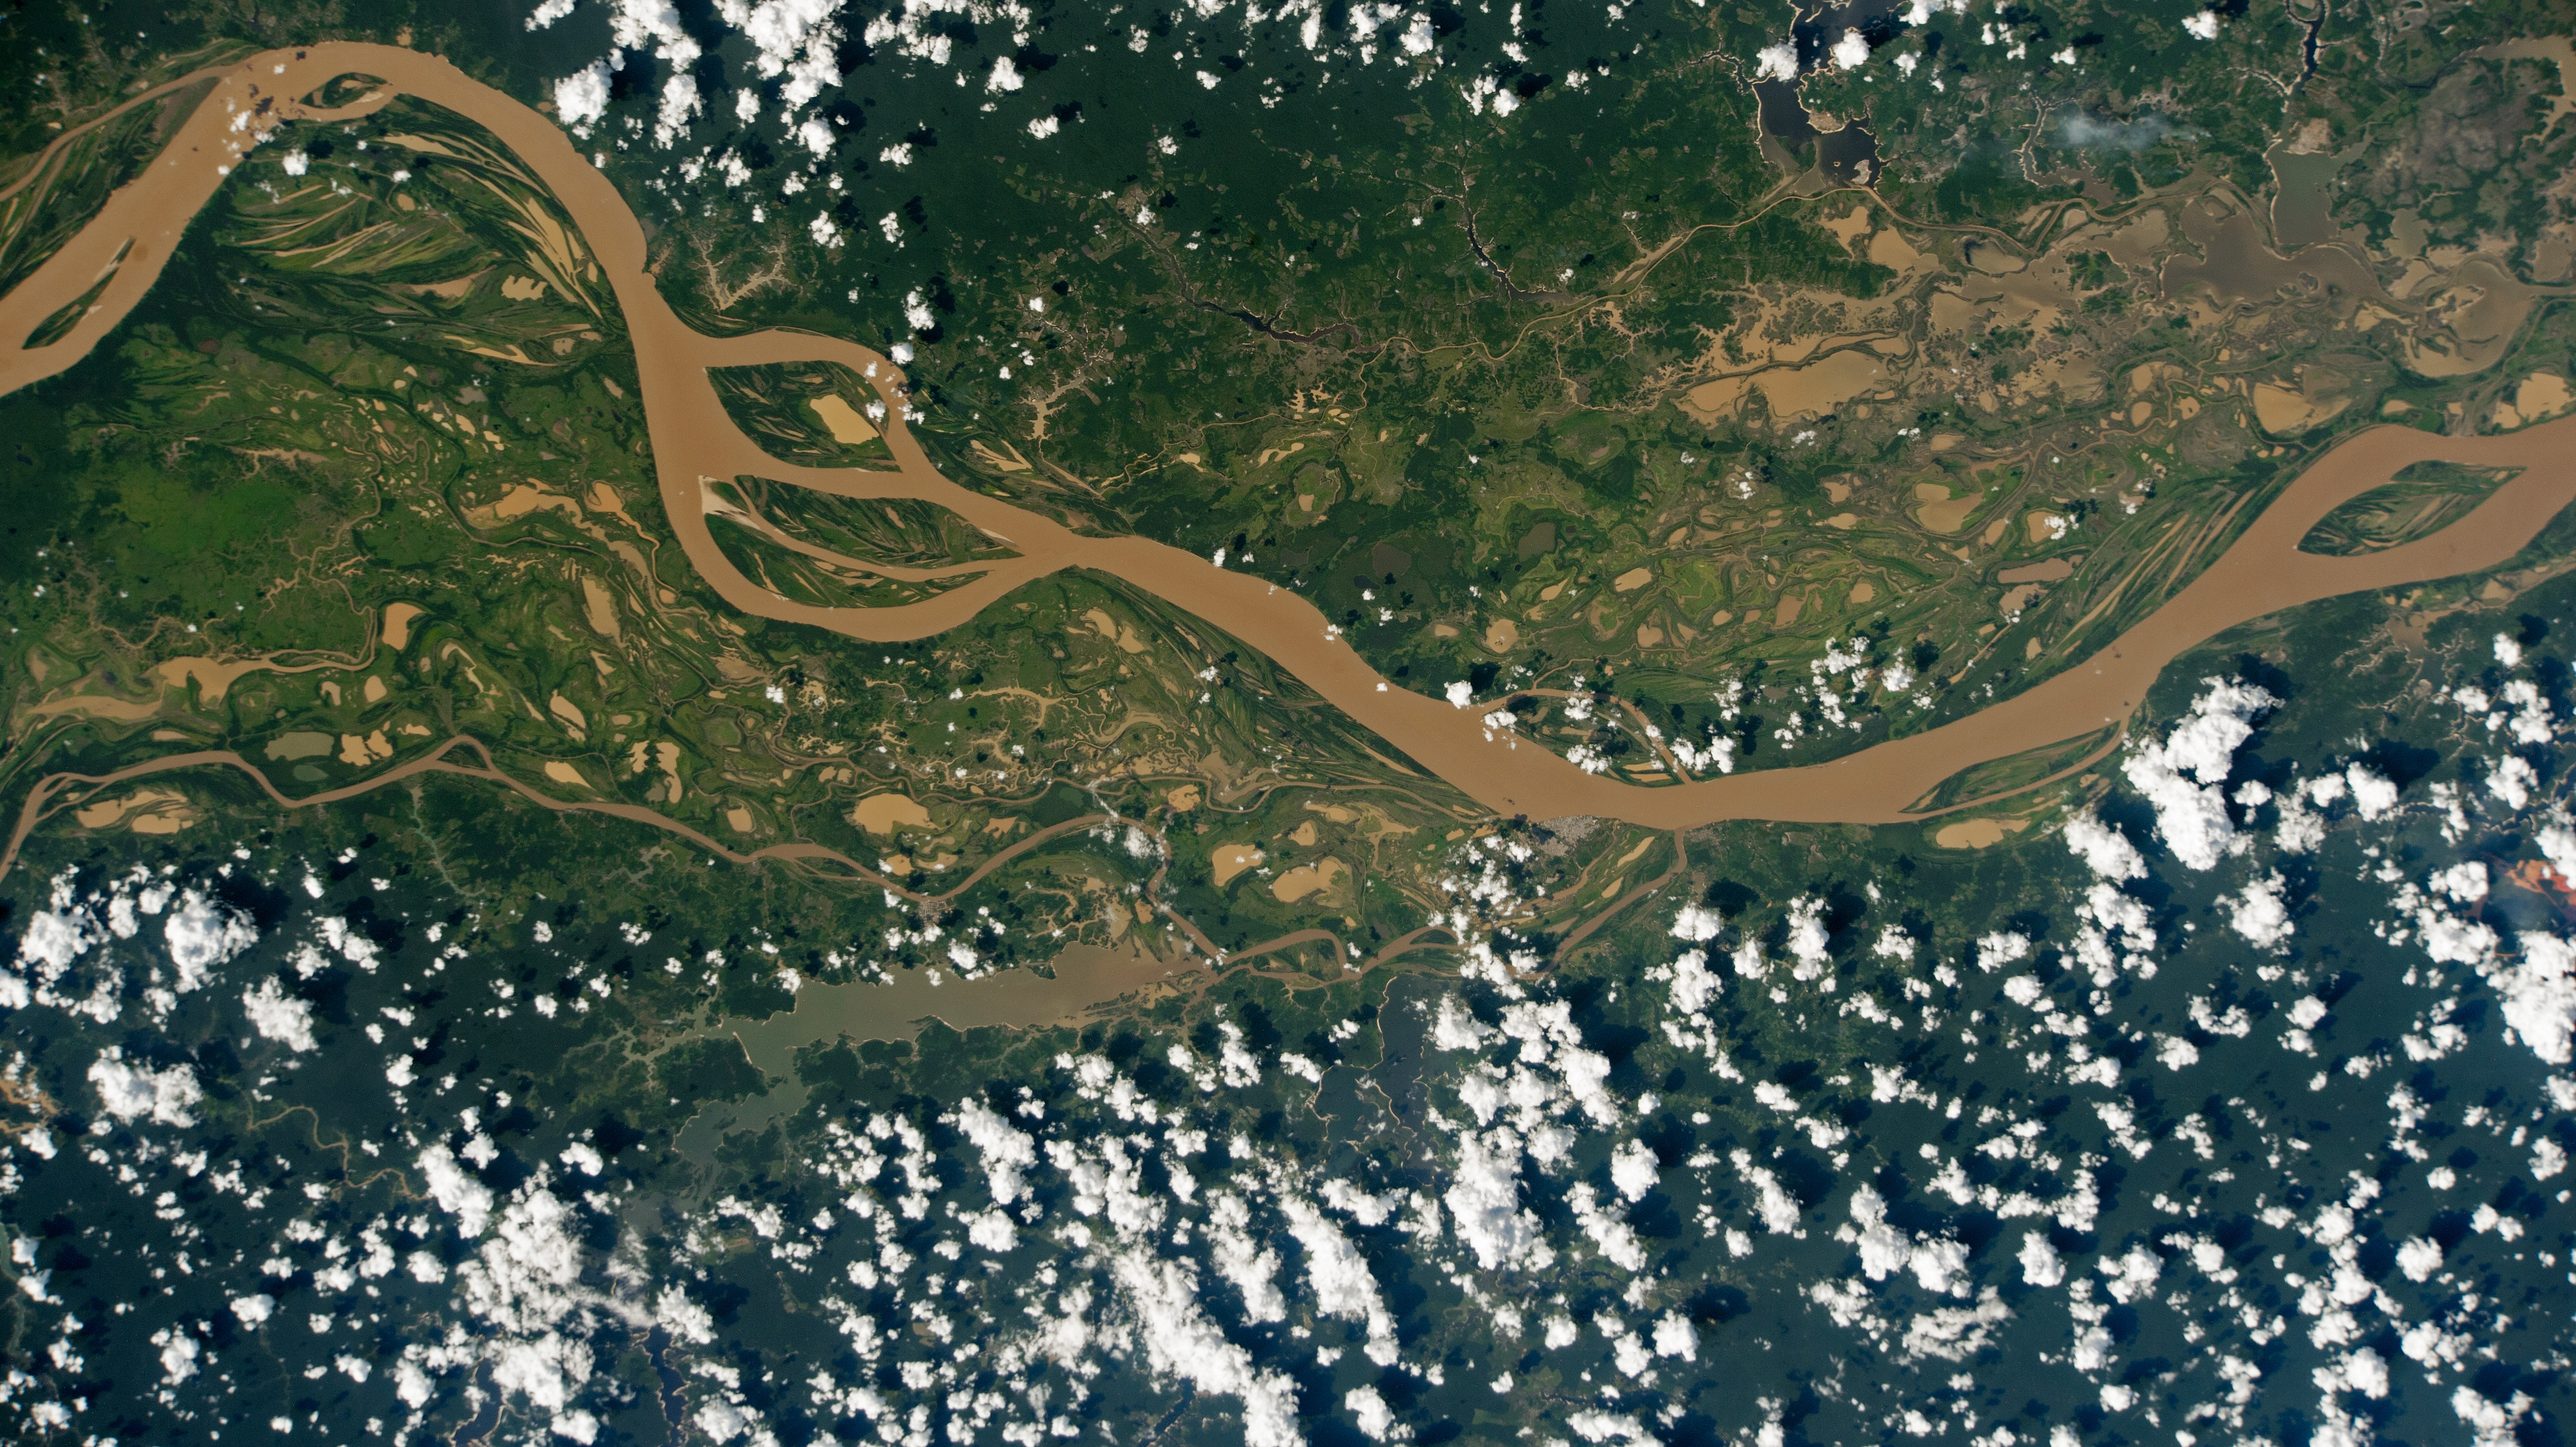 Muddy Water and a Wide Floodplain - related image preview